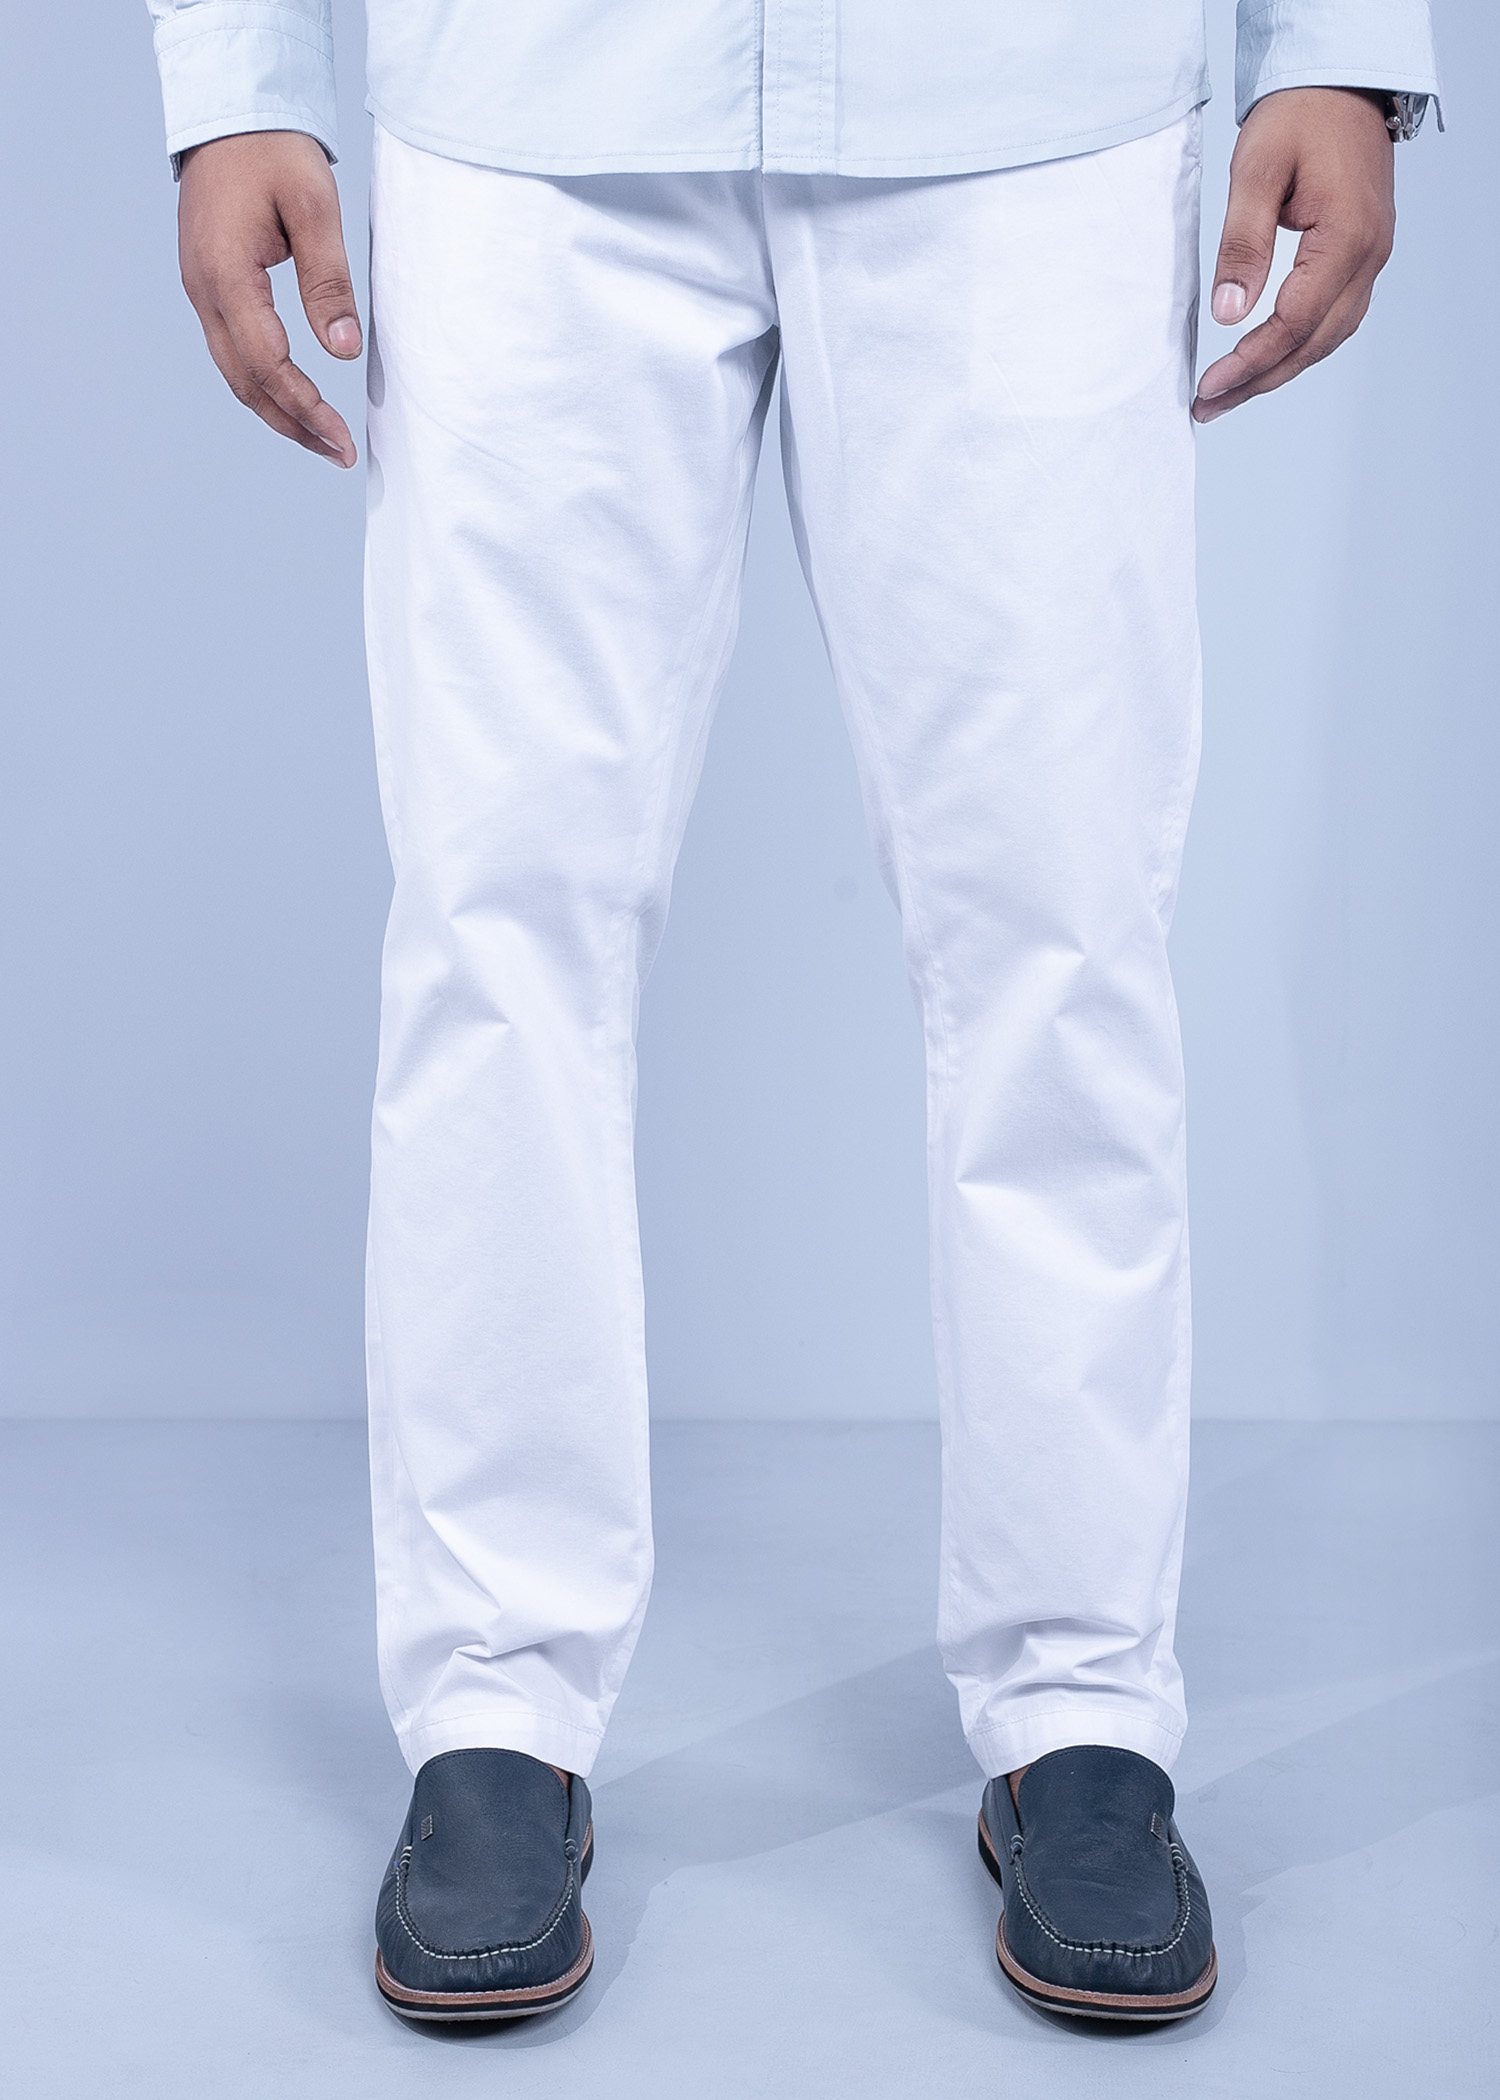 silvan chino pant white color half front view